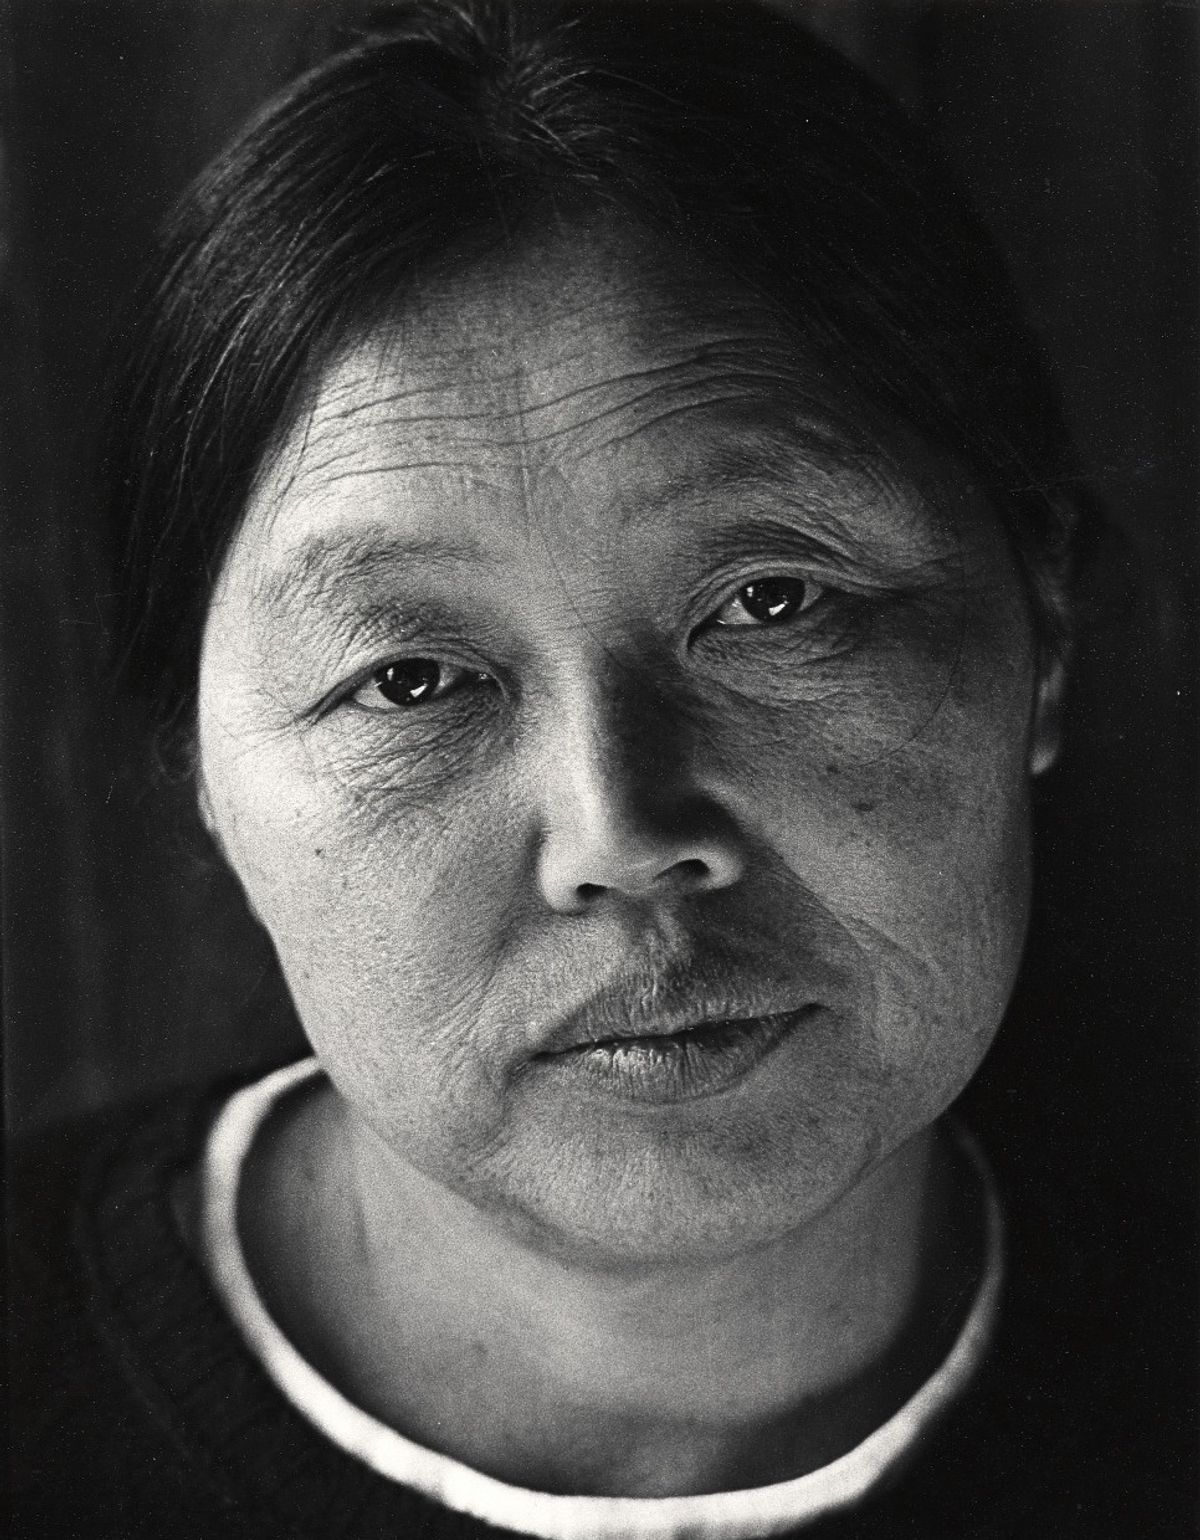 The late artist Ruth Asawa (photographed in 1973) is one of the artists profile in The Archives of American Art's focus on Asian Pacific American artists this month Mimi Jacobs